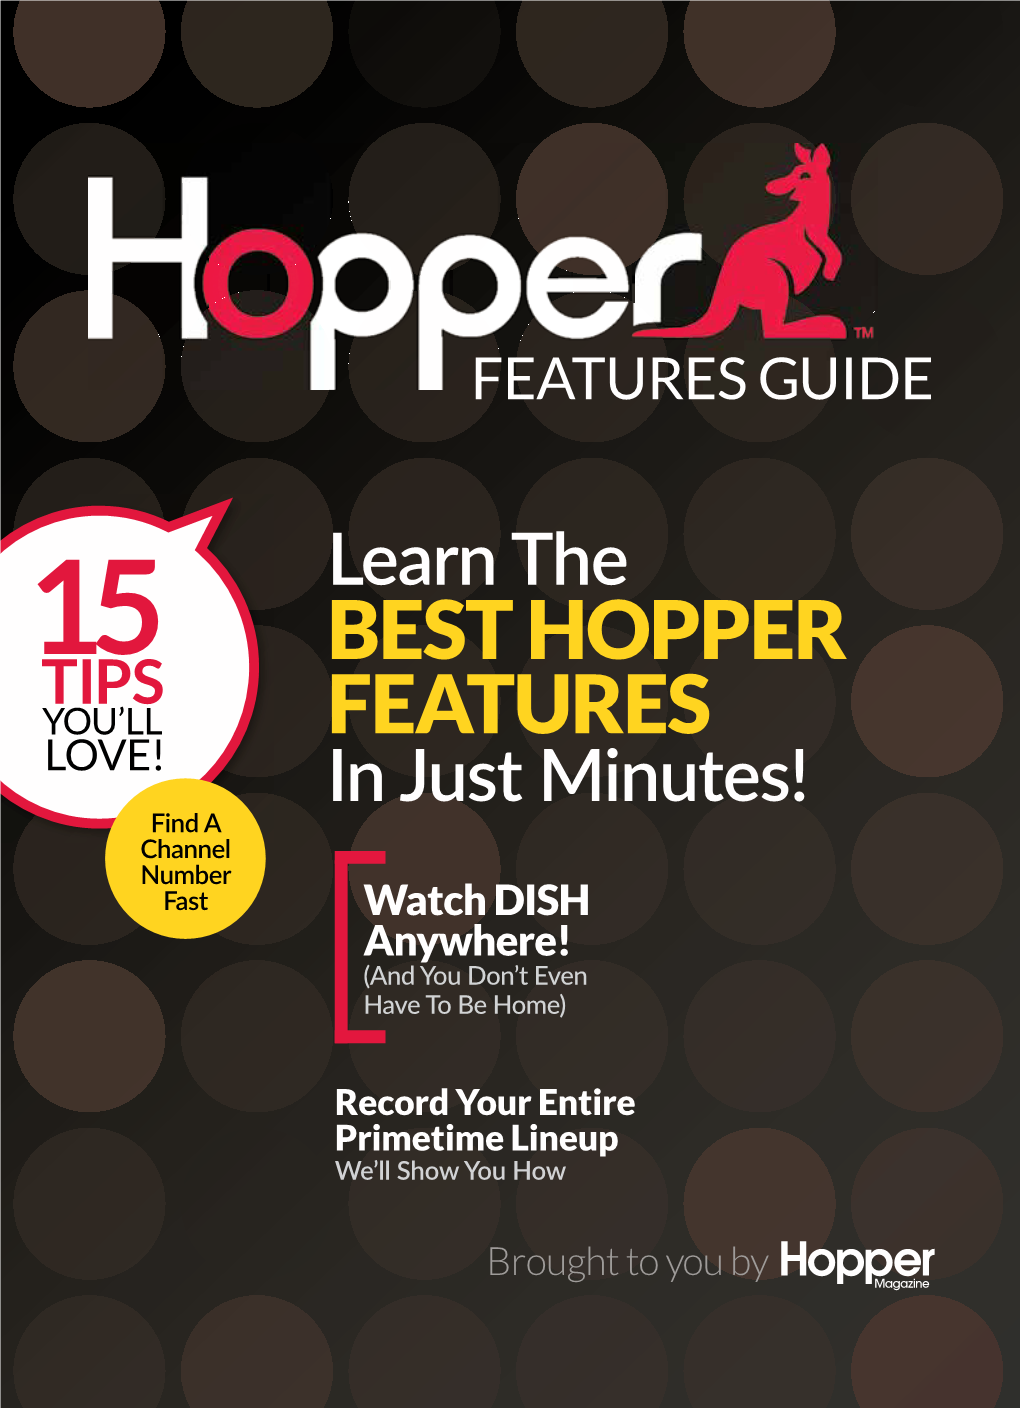 Learn the 15 BEST HOPPER TIPS YOU’LL FEATURES LOVE! in Just Minutes! Find a Channel Number Fast Watch DISH Anywhere! (And You Don’T Even Have to Be Home)